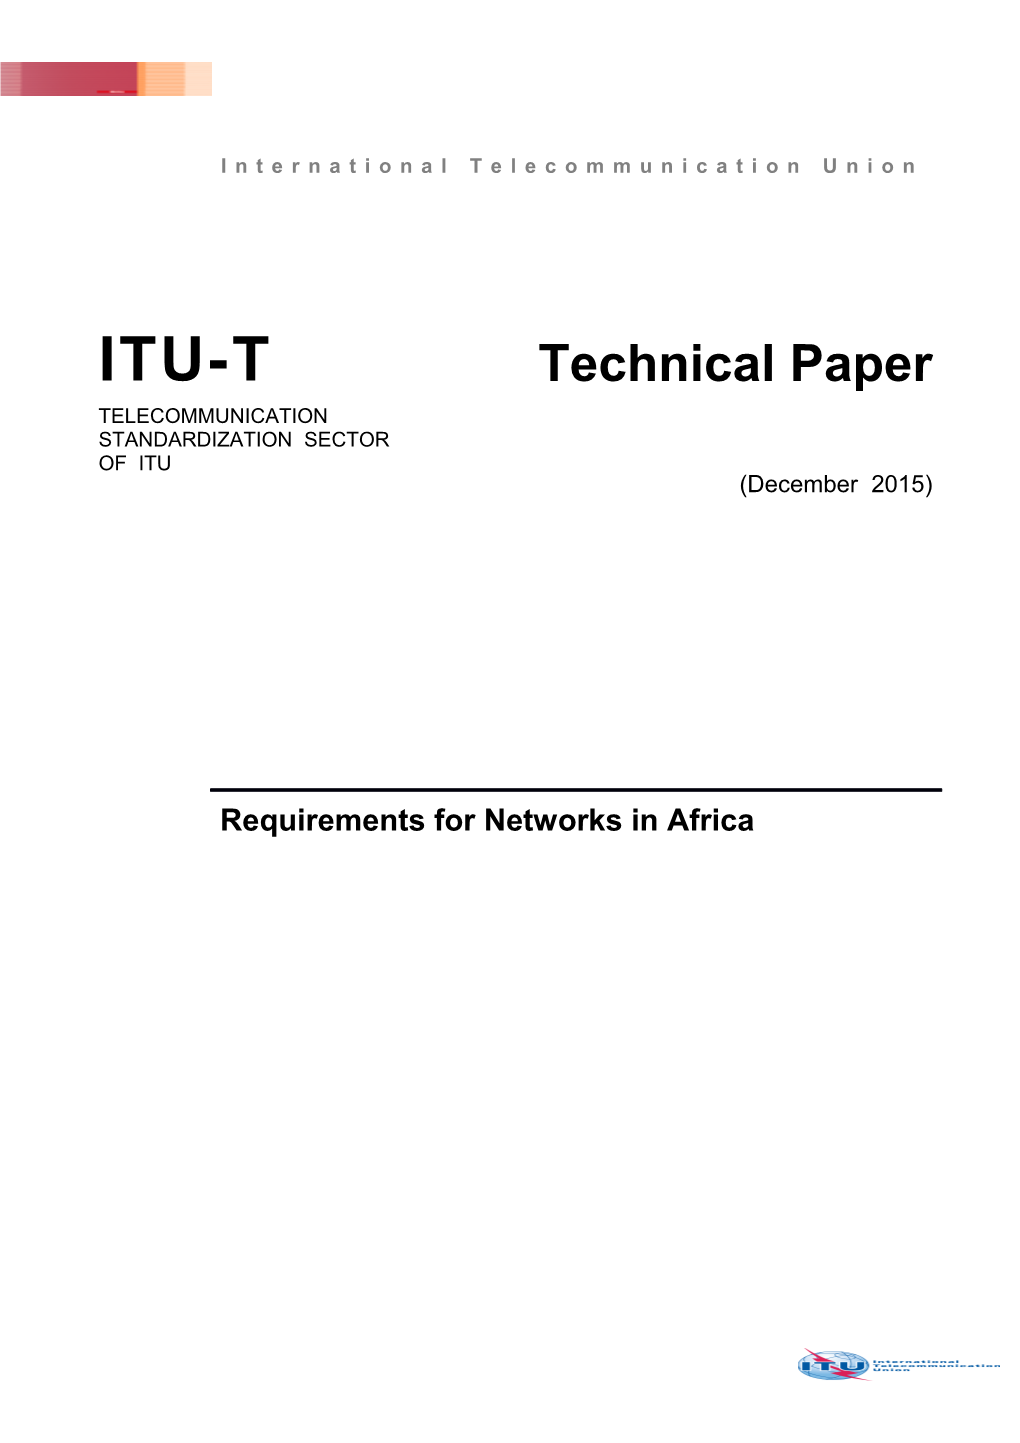 Technical Paper on Network Requirements for Africa